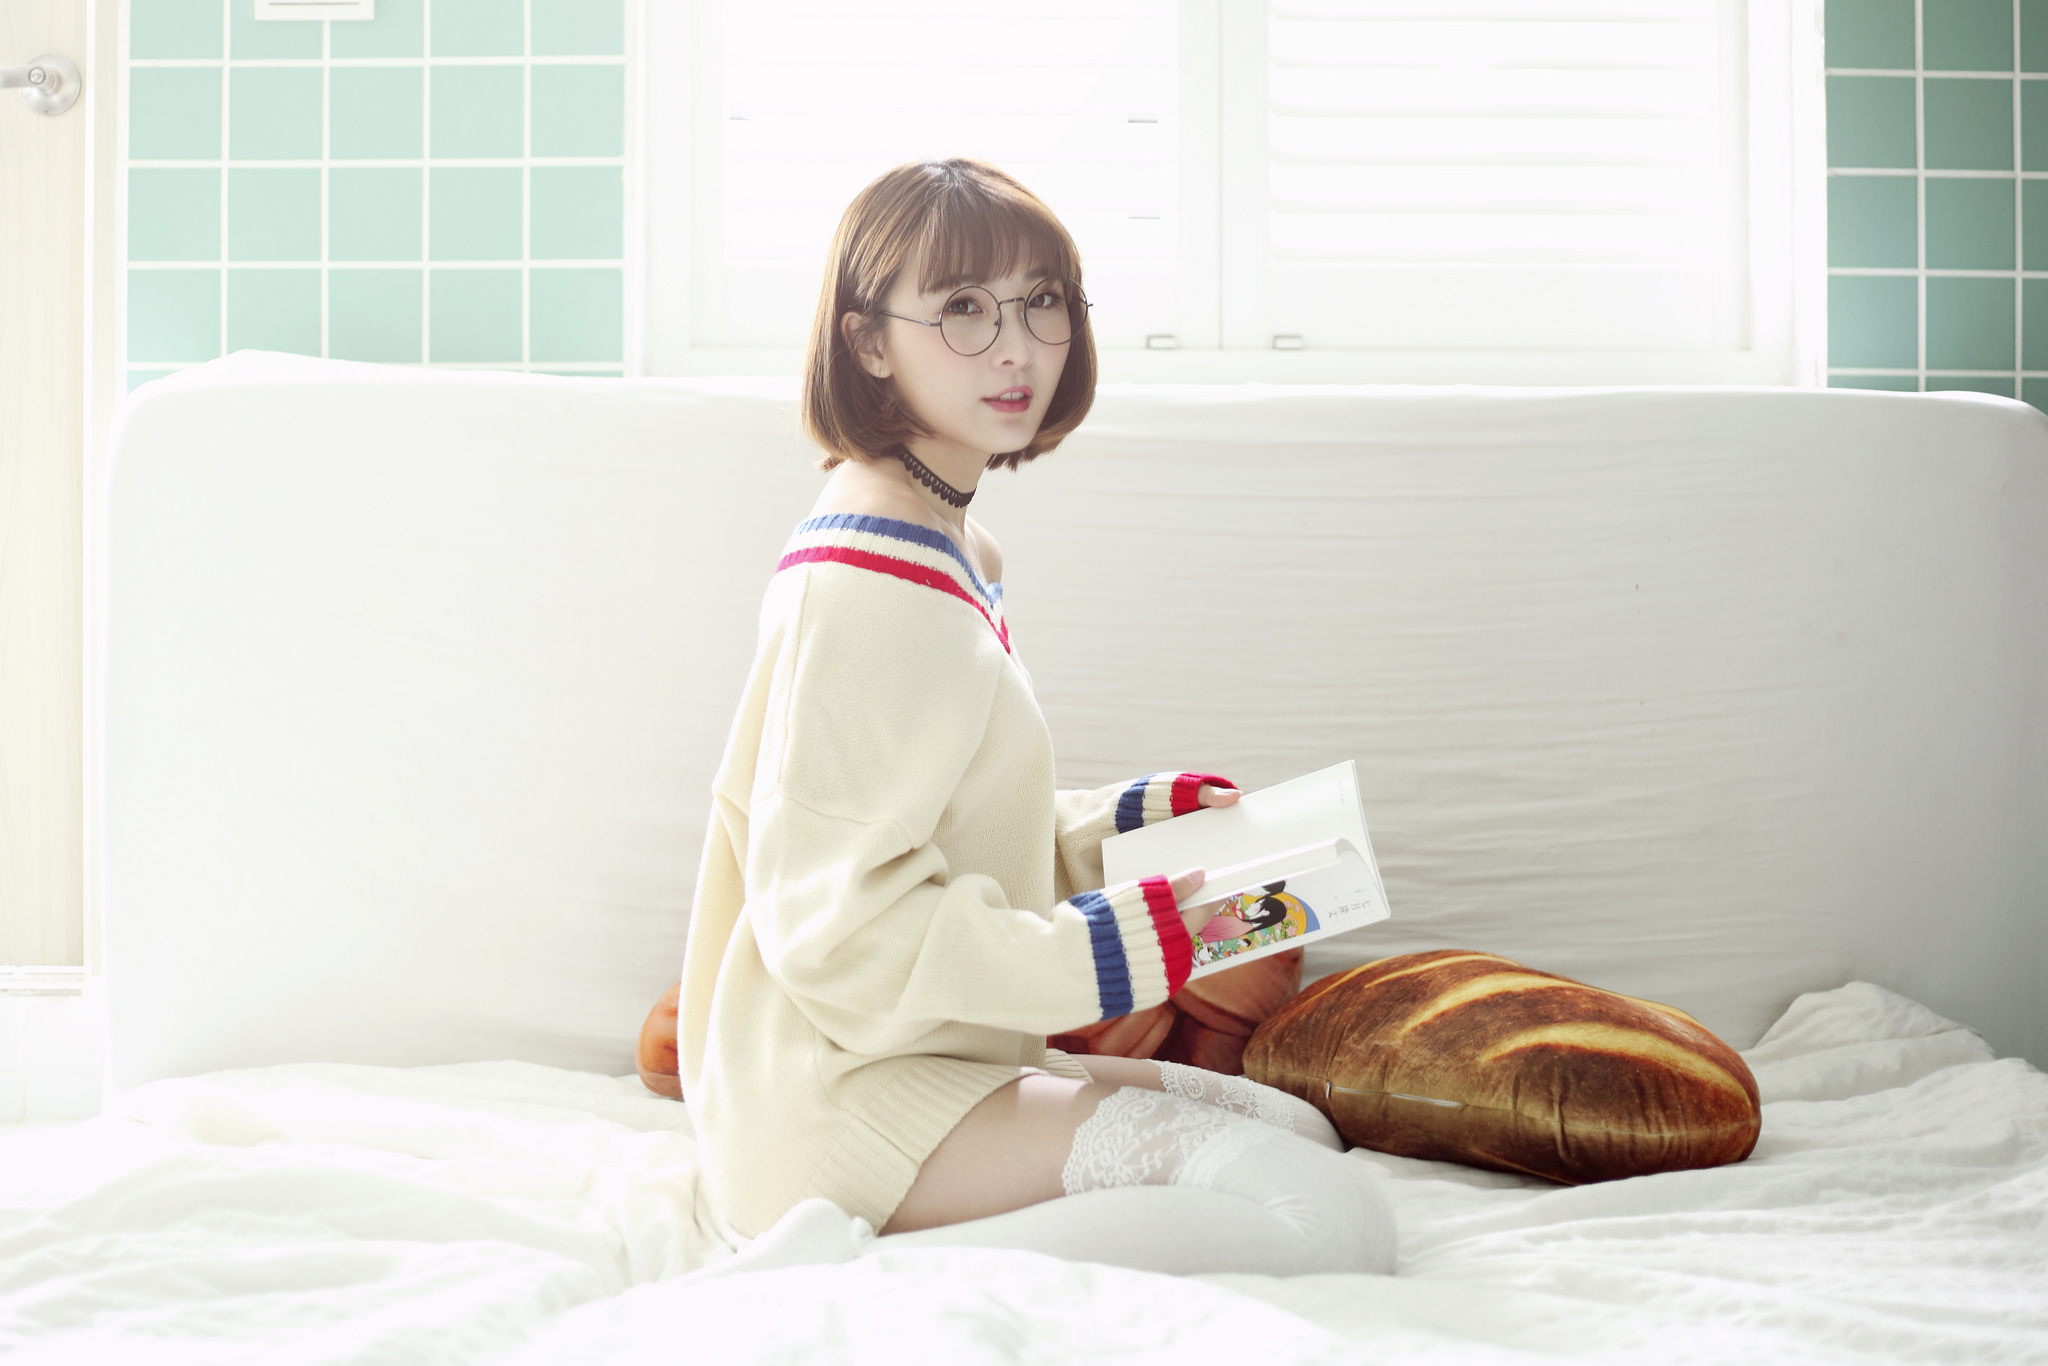 People 2048x1366 Asian women model brunette fake glasses looking at viewer portrait indoors in bed kneeling sweater stockings white stockings necklace books pillow side view women indoors